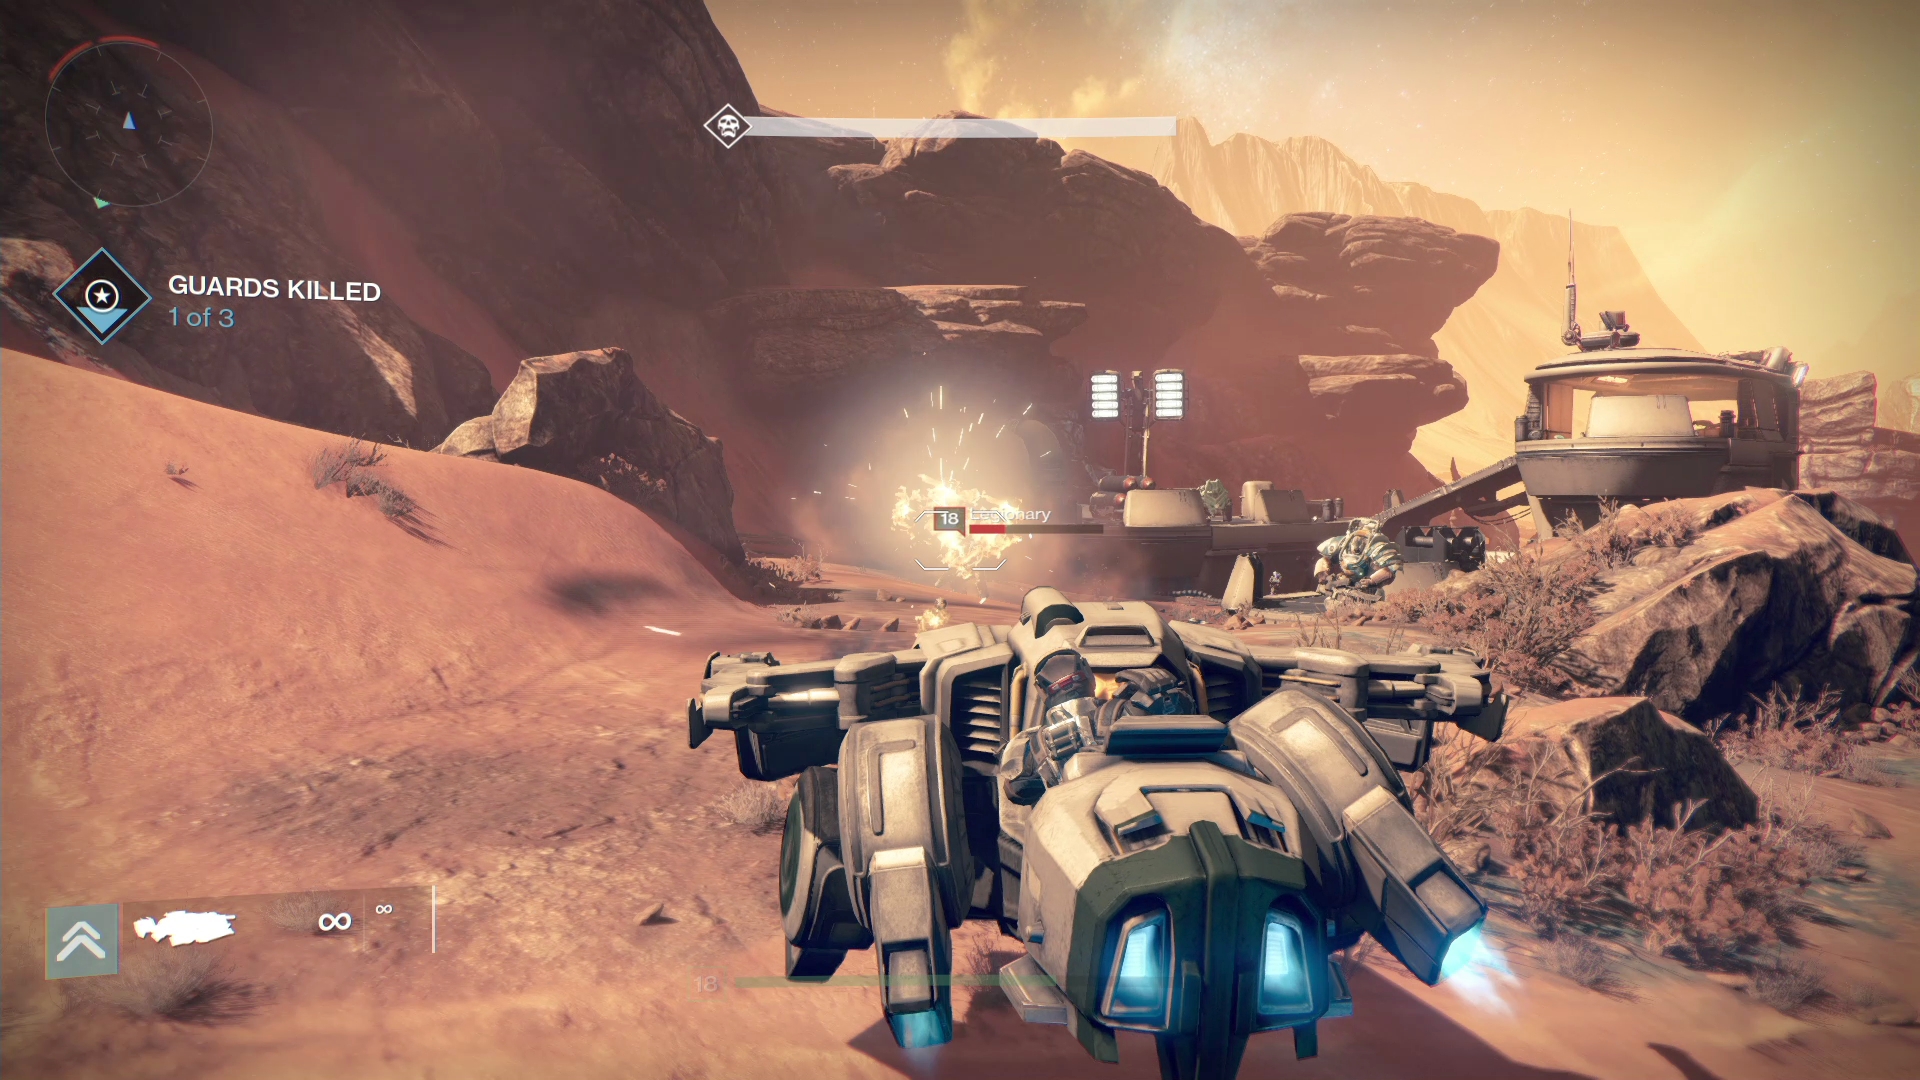 The crucible is where the action heats up, even if it rarely erupts with true thrills. This is where Destiny's competitive multiplayer lurks, ...